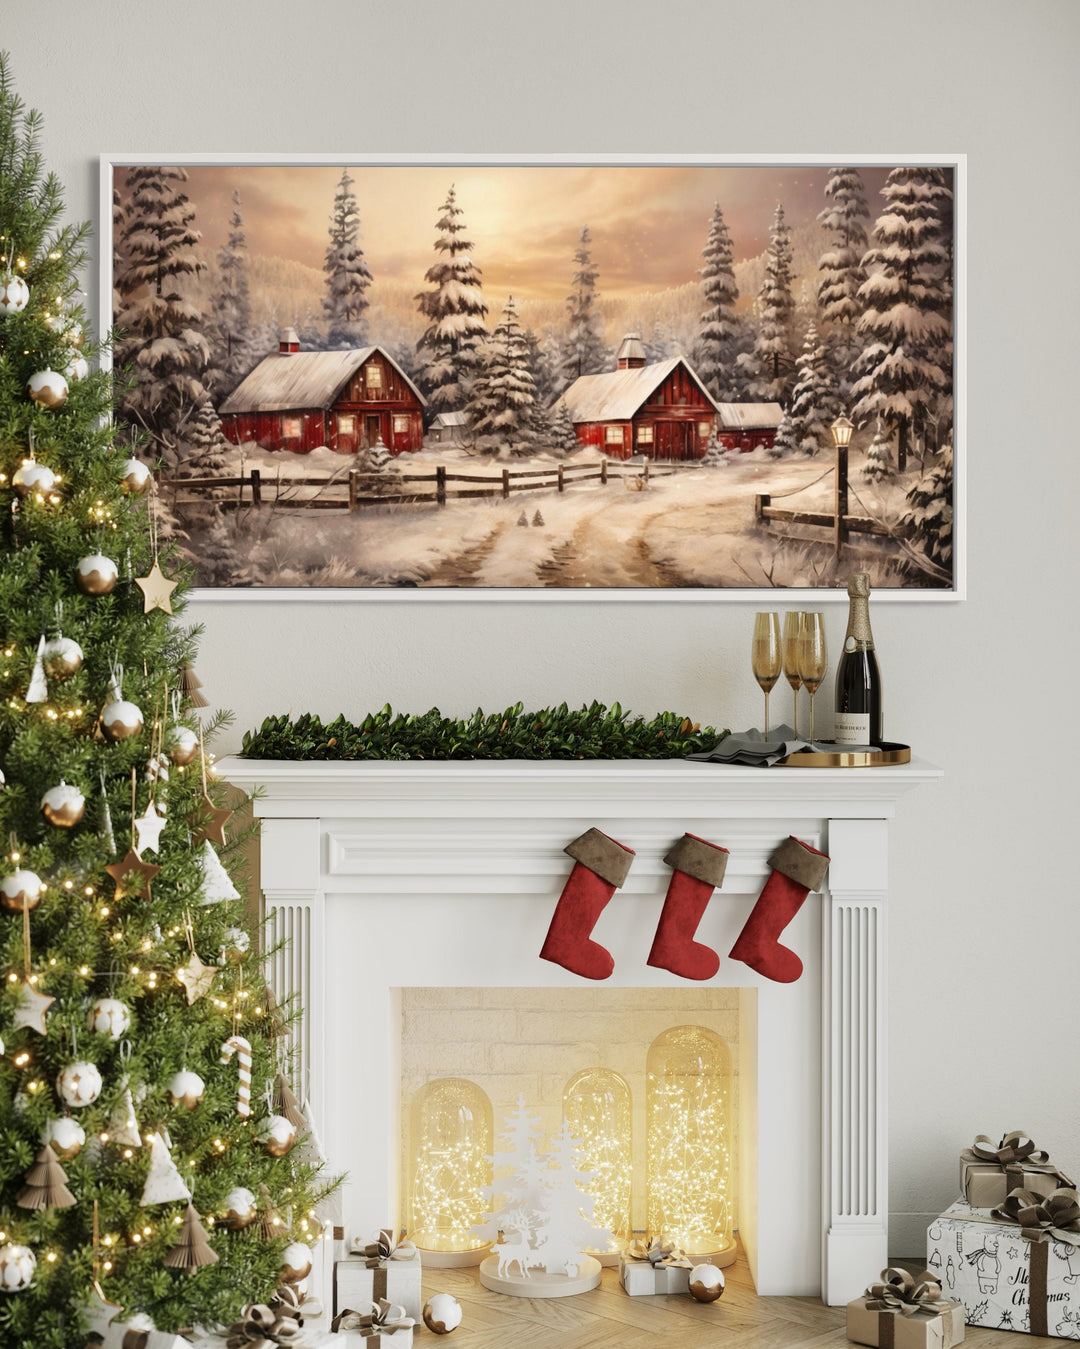 Farm Red Barn In Winter Canvas Wall Art "Winter Homestead" hanging over mantel in Christmas decorated home